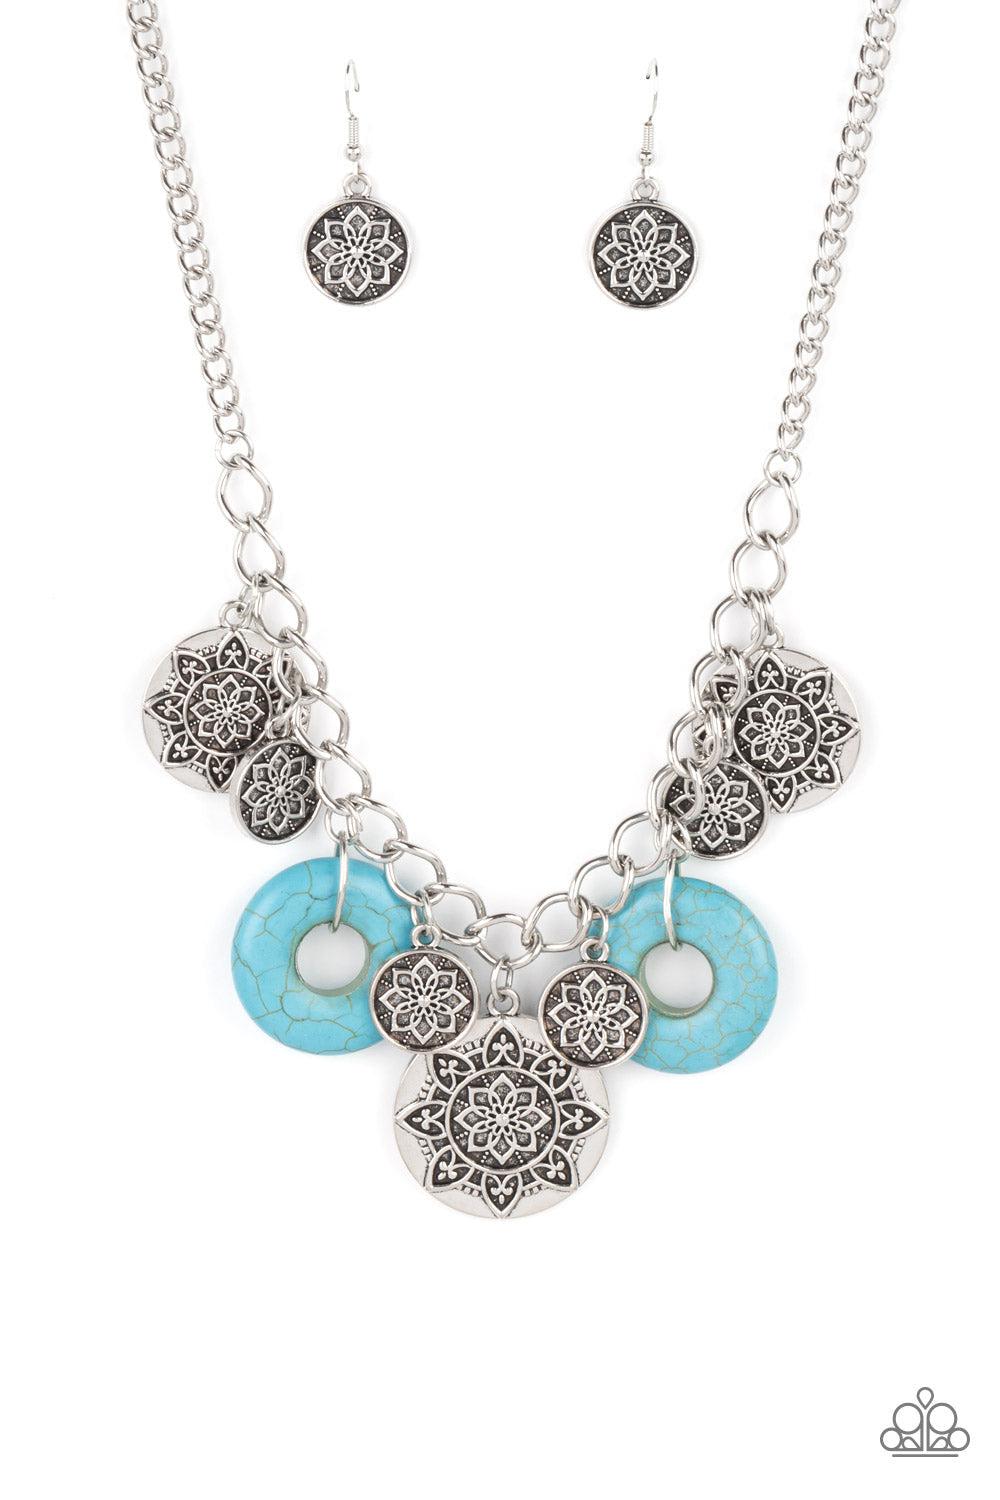 Western Zen Turquoise Blue Stone Necklace - Paparazzi Accessories- lightbox - CarasShop.com - $5 Jewelry by Cara Jewels